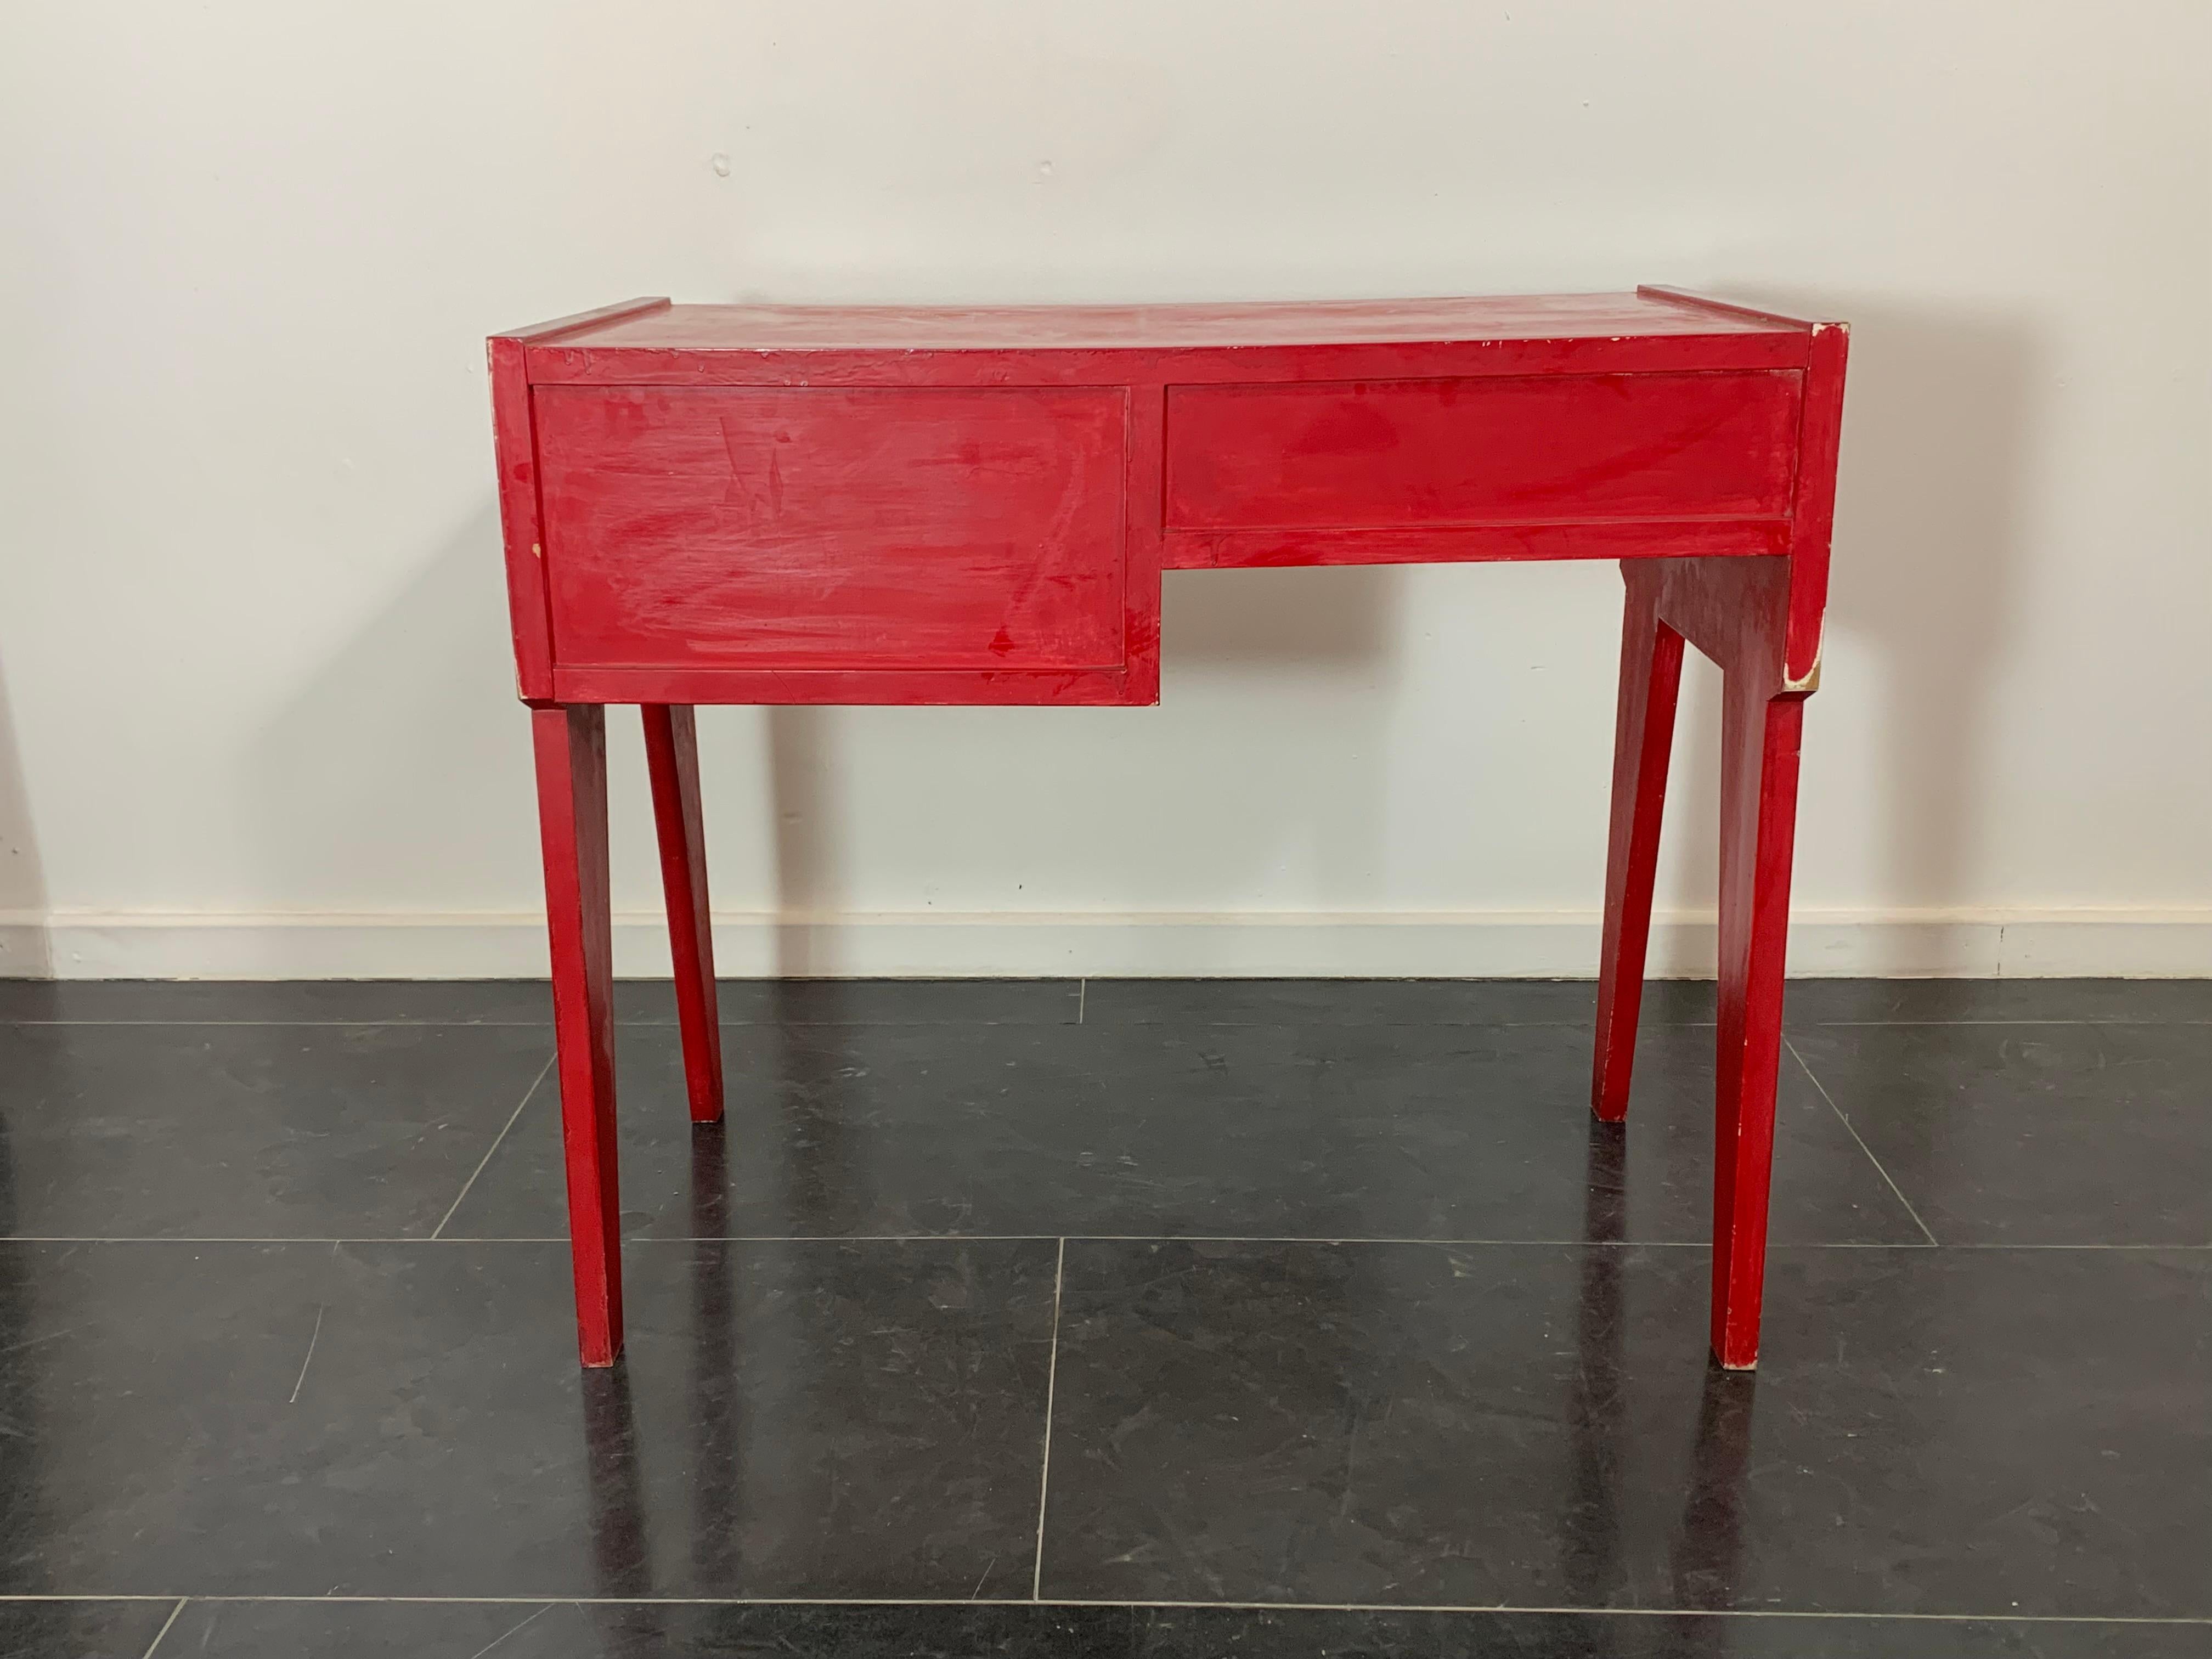 Red lacquered writing desk on glue and plaster preparation, 1950s. Equipped with drawer and open compartment. Later retouched and repainted. It shows patina due to age and use, retouching and painting done over time.
Packaging with bubble wrap and